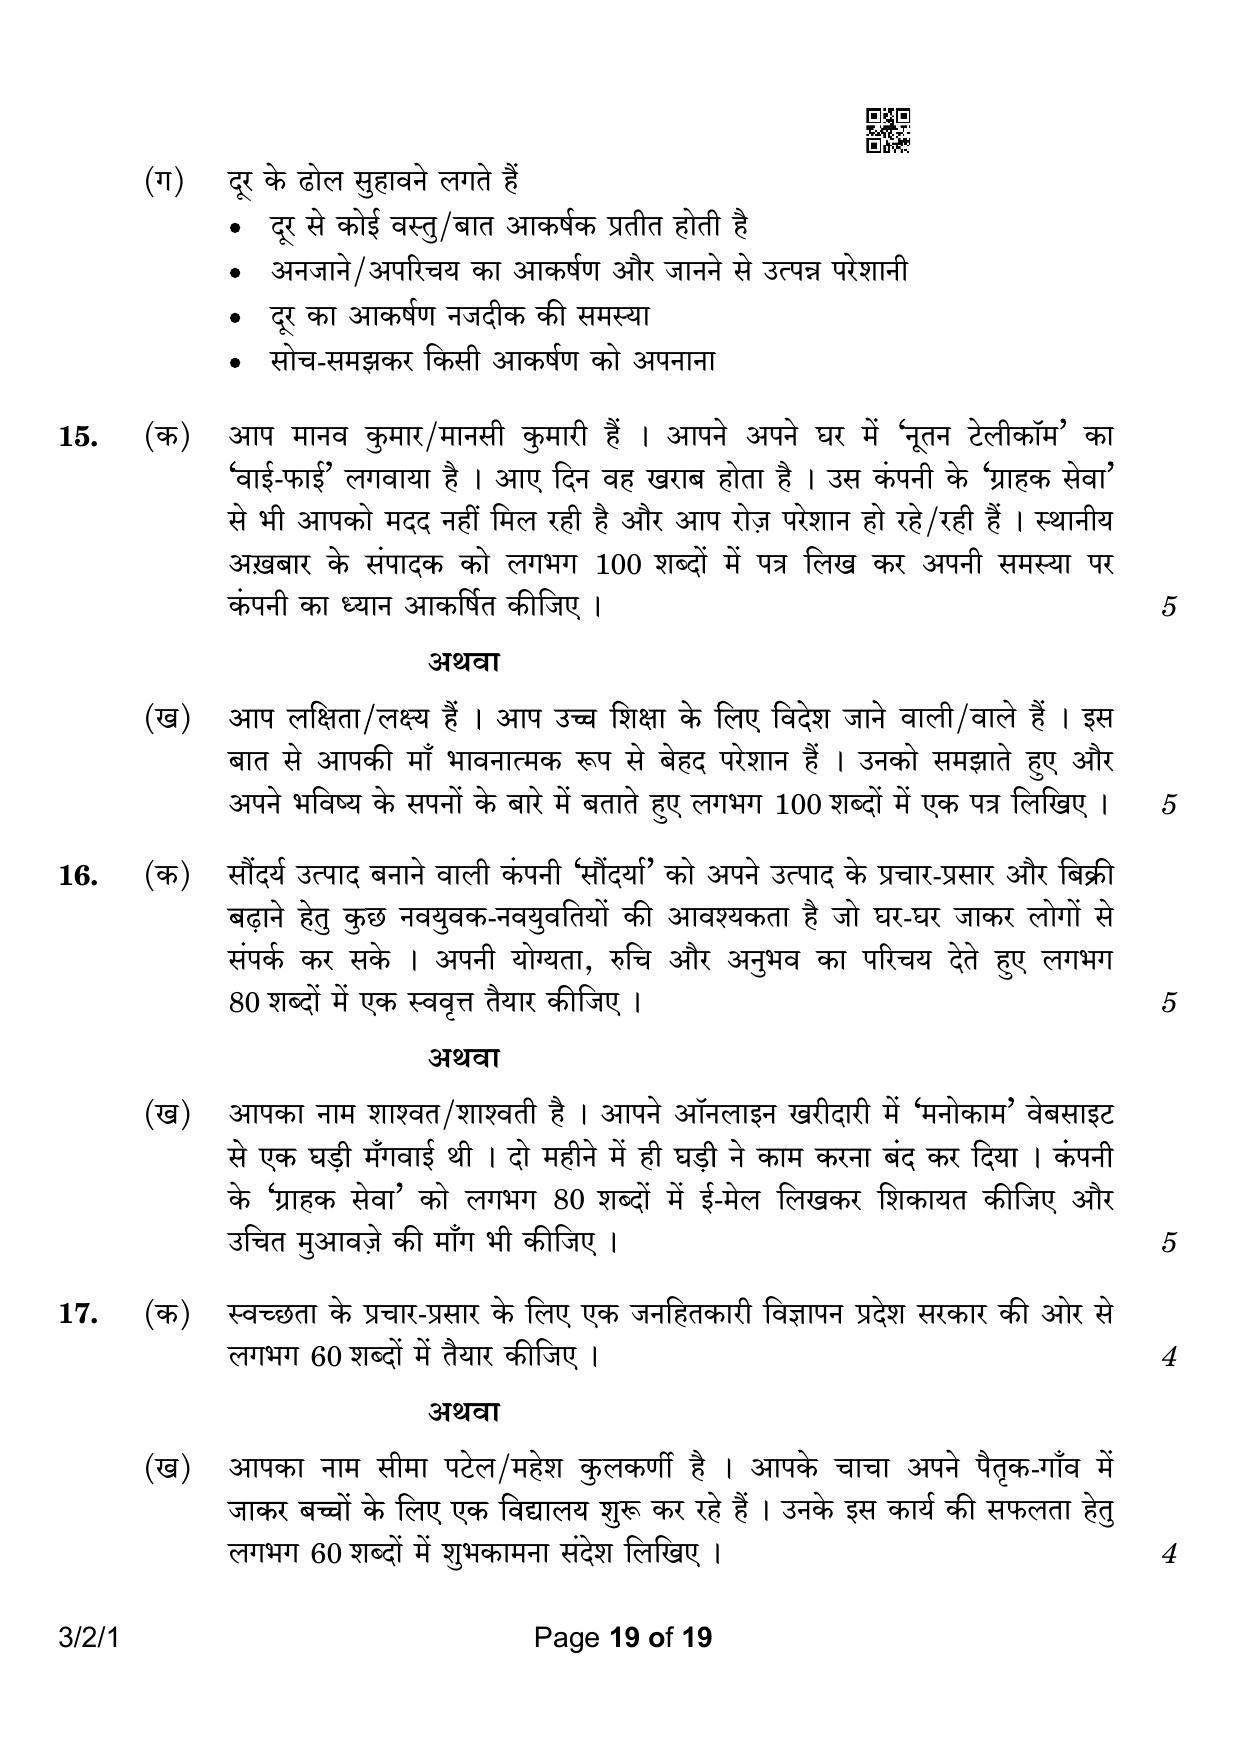 CBSE Class 10 3-2-1 Hindi A 2023 Question Paper - Page 19